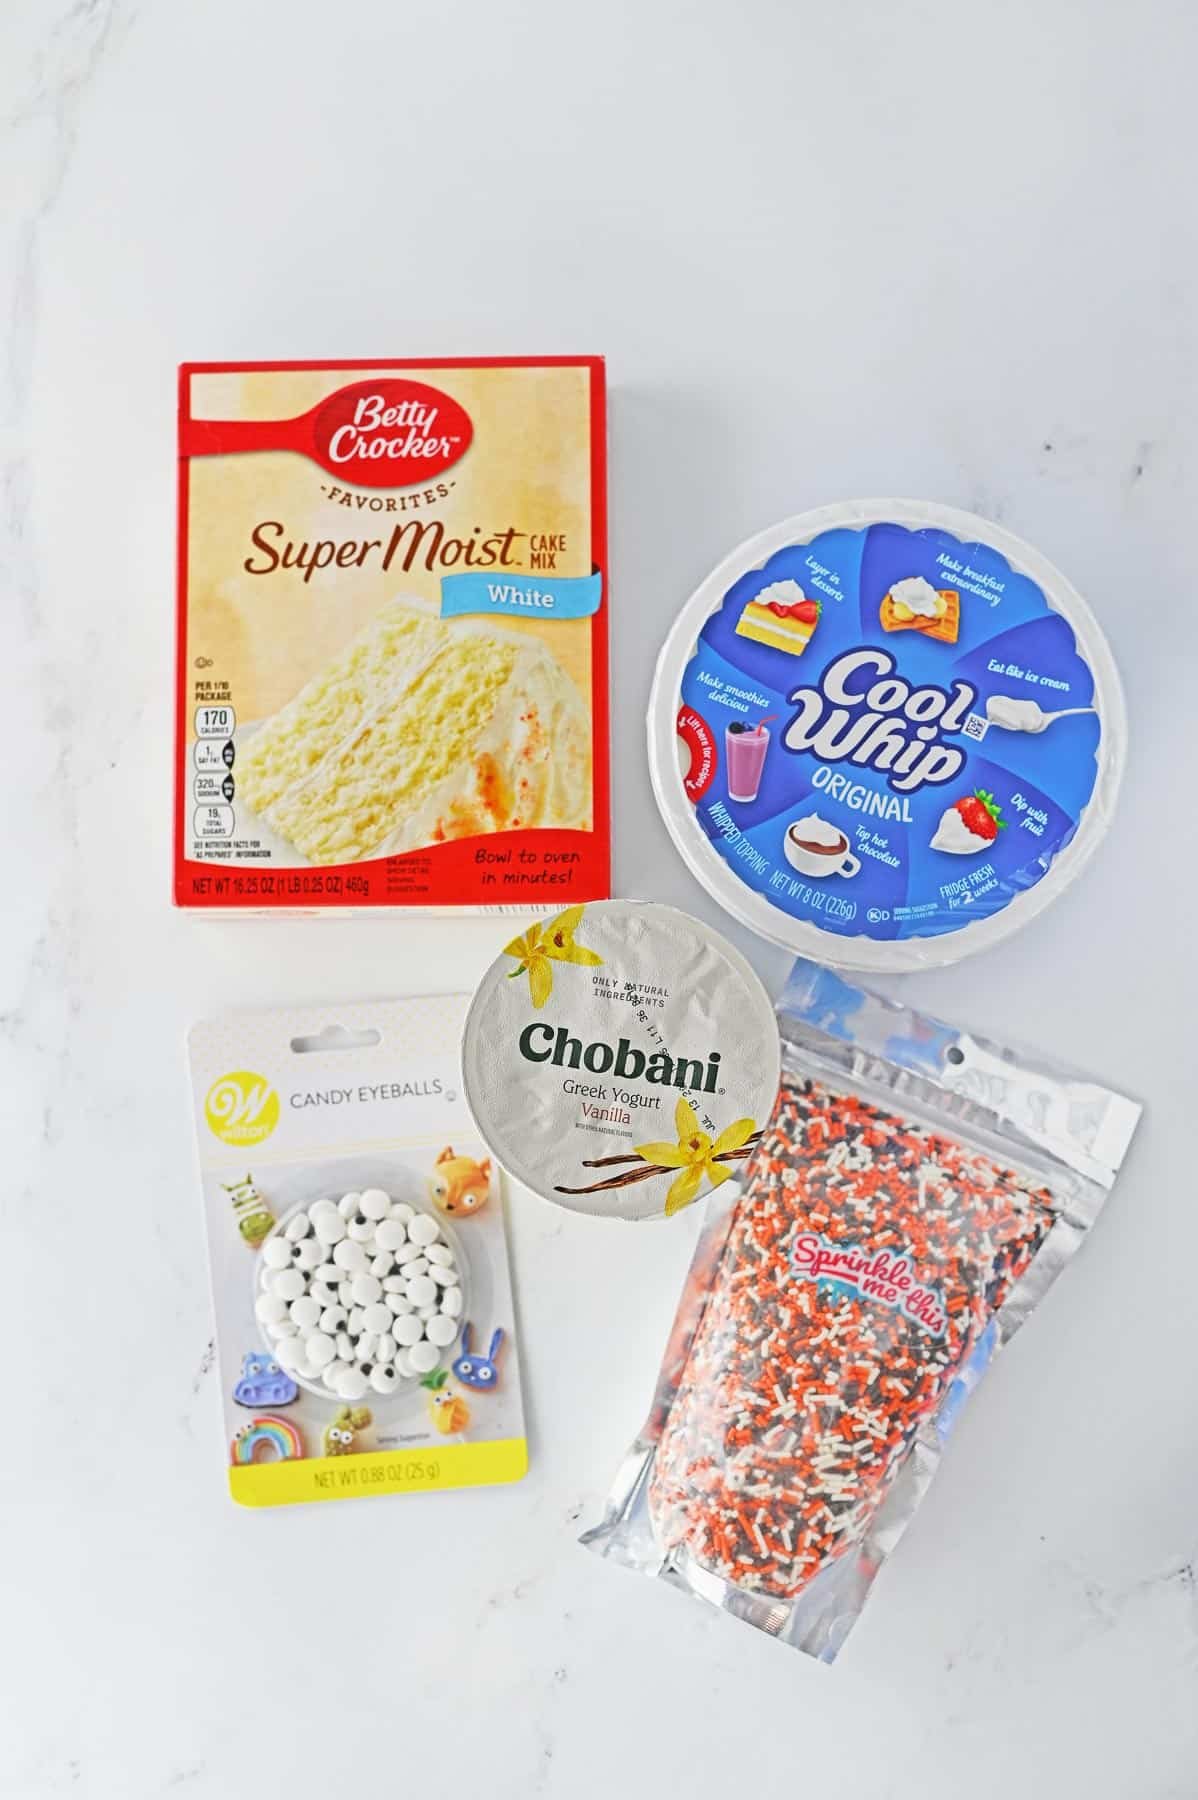 ingredients for an easy funfetti dip recipe - box cake mix, container of cool whip, small carton of vanilla yogurt, candy eyes, and a big of sprinkles.